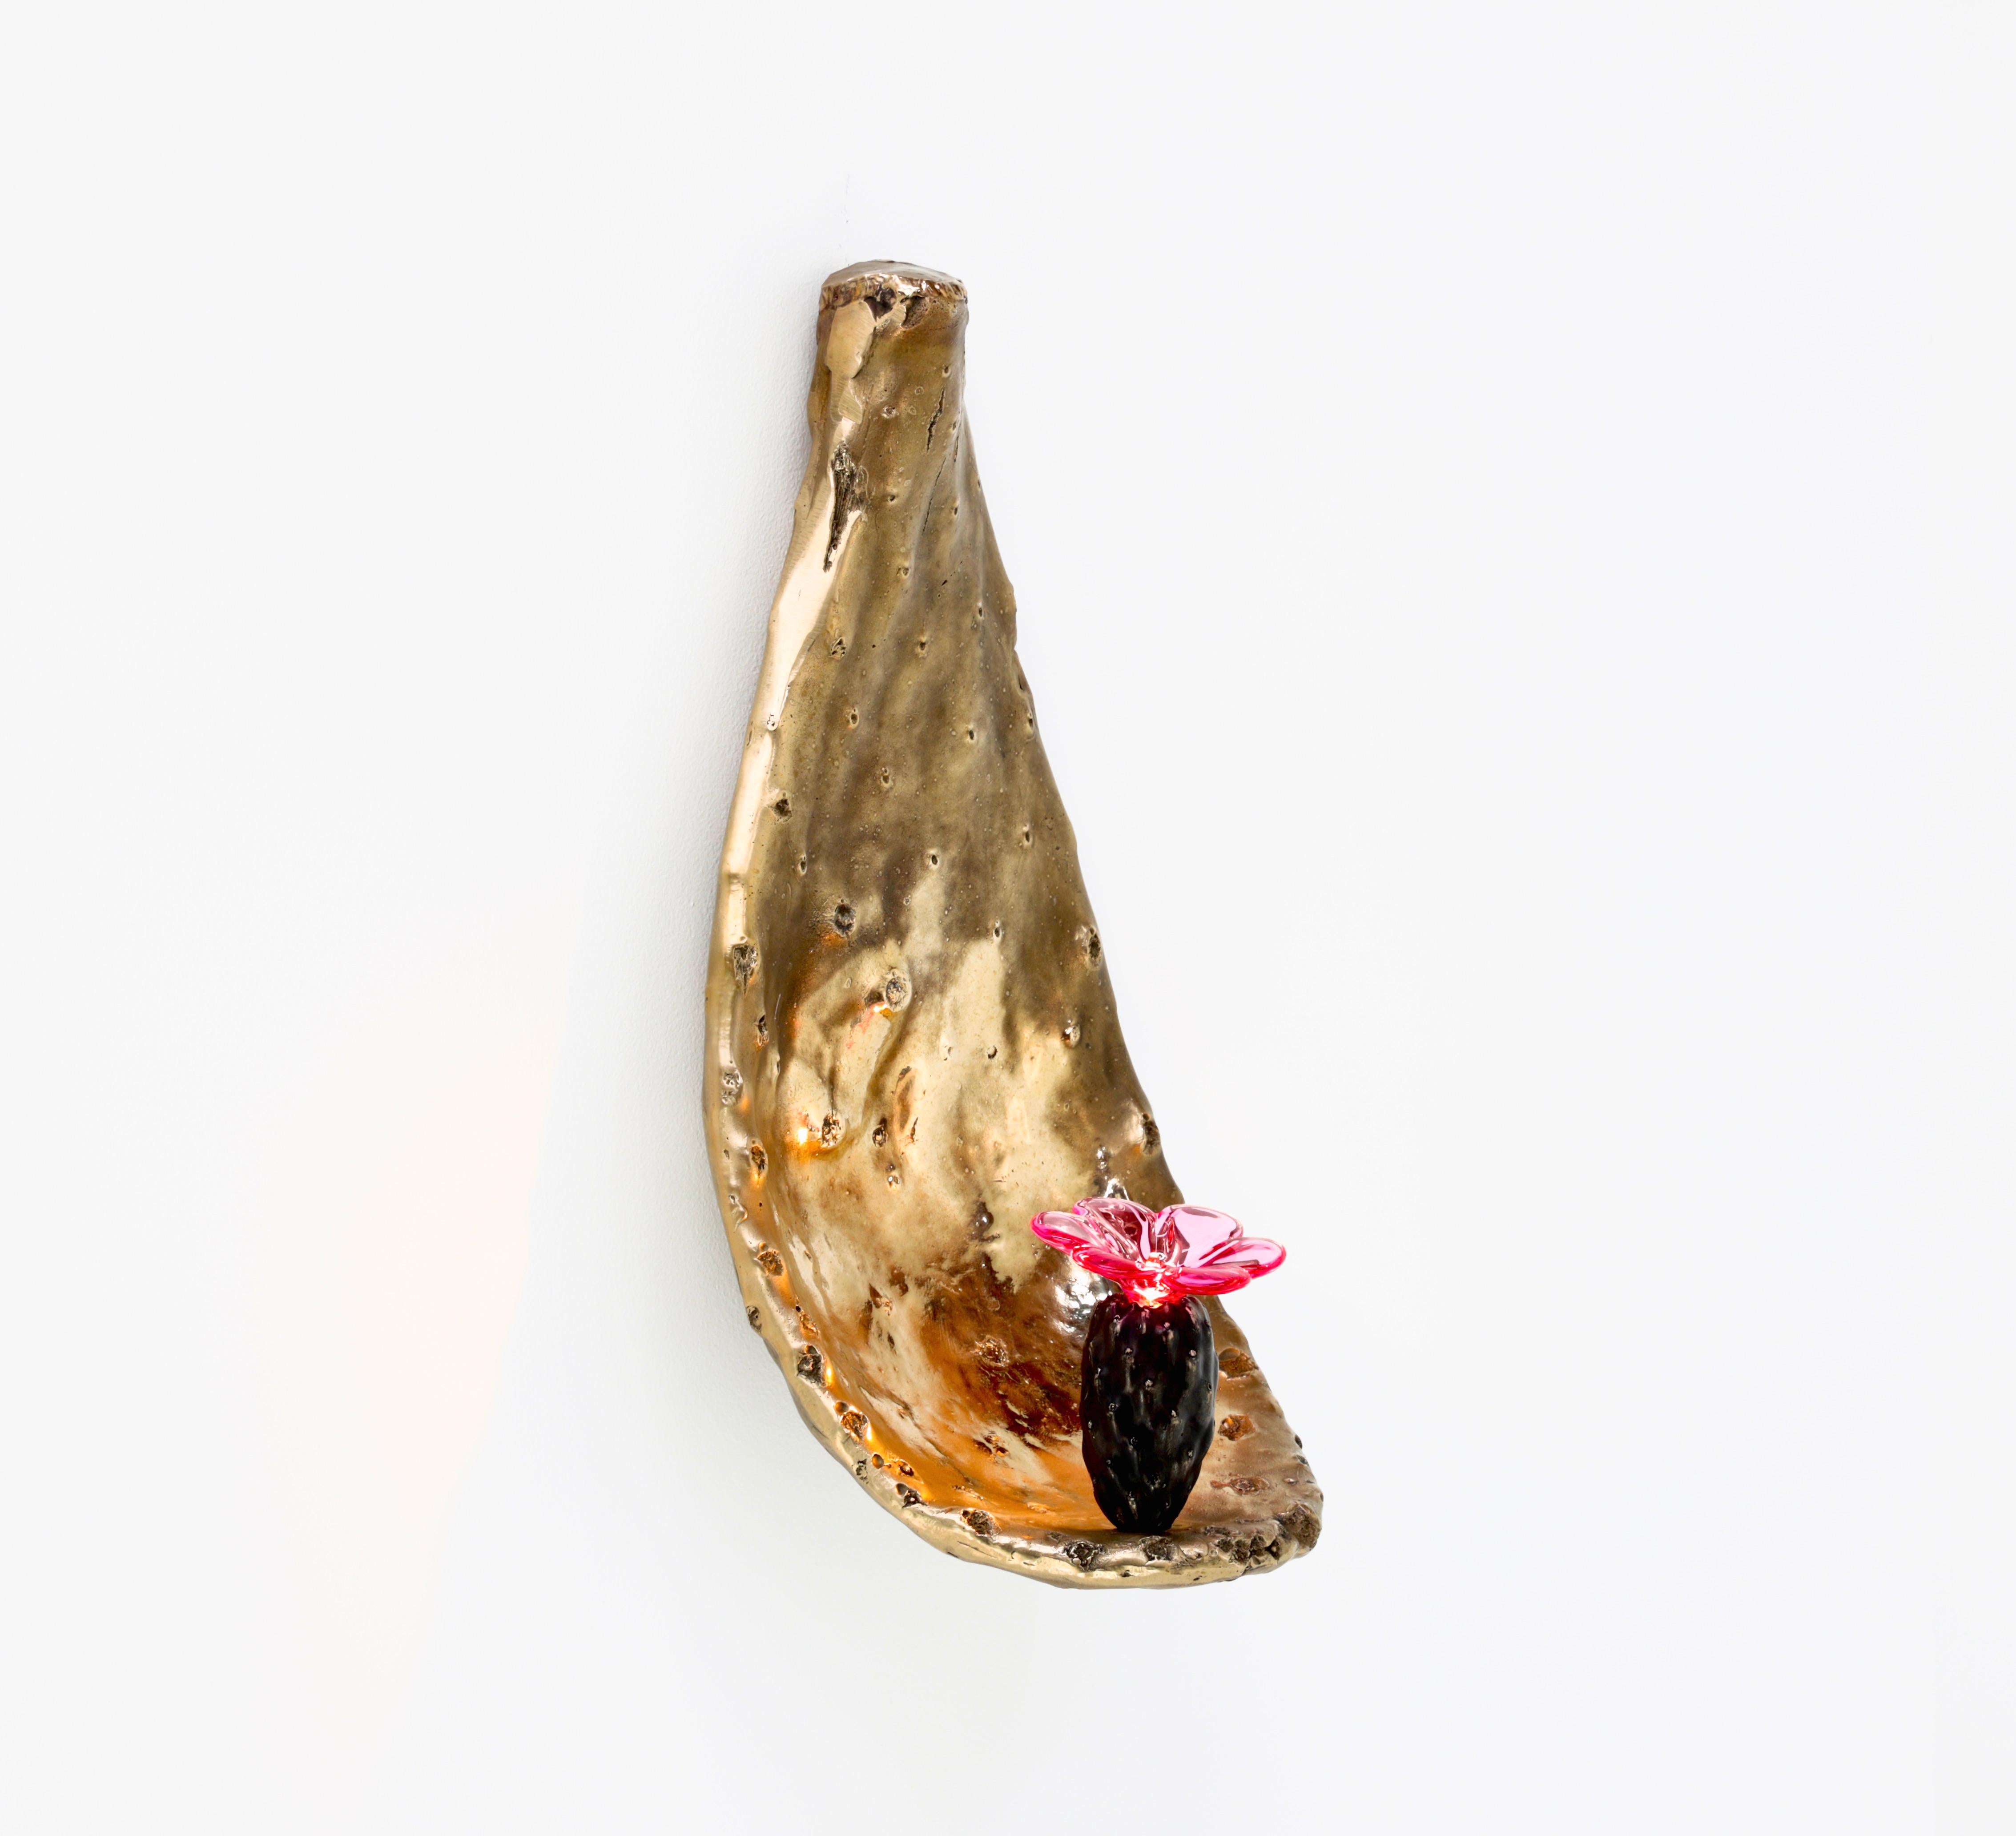 The Nopal sconce is cast bronze and individually detailed, making them one of a kind.
The body is raw bronze and the inner palm is high polished to reflect light, the fruit is patinated and topped with a pink glass flower.
2700K LED bulb with LED